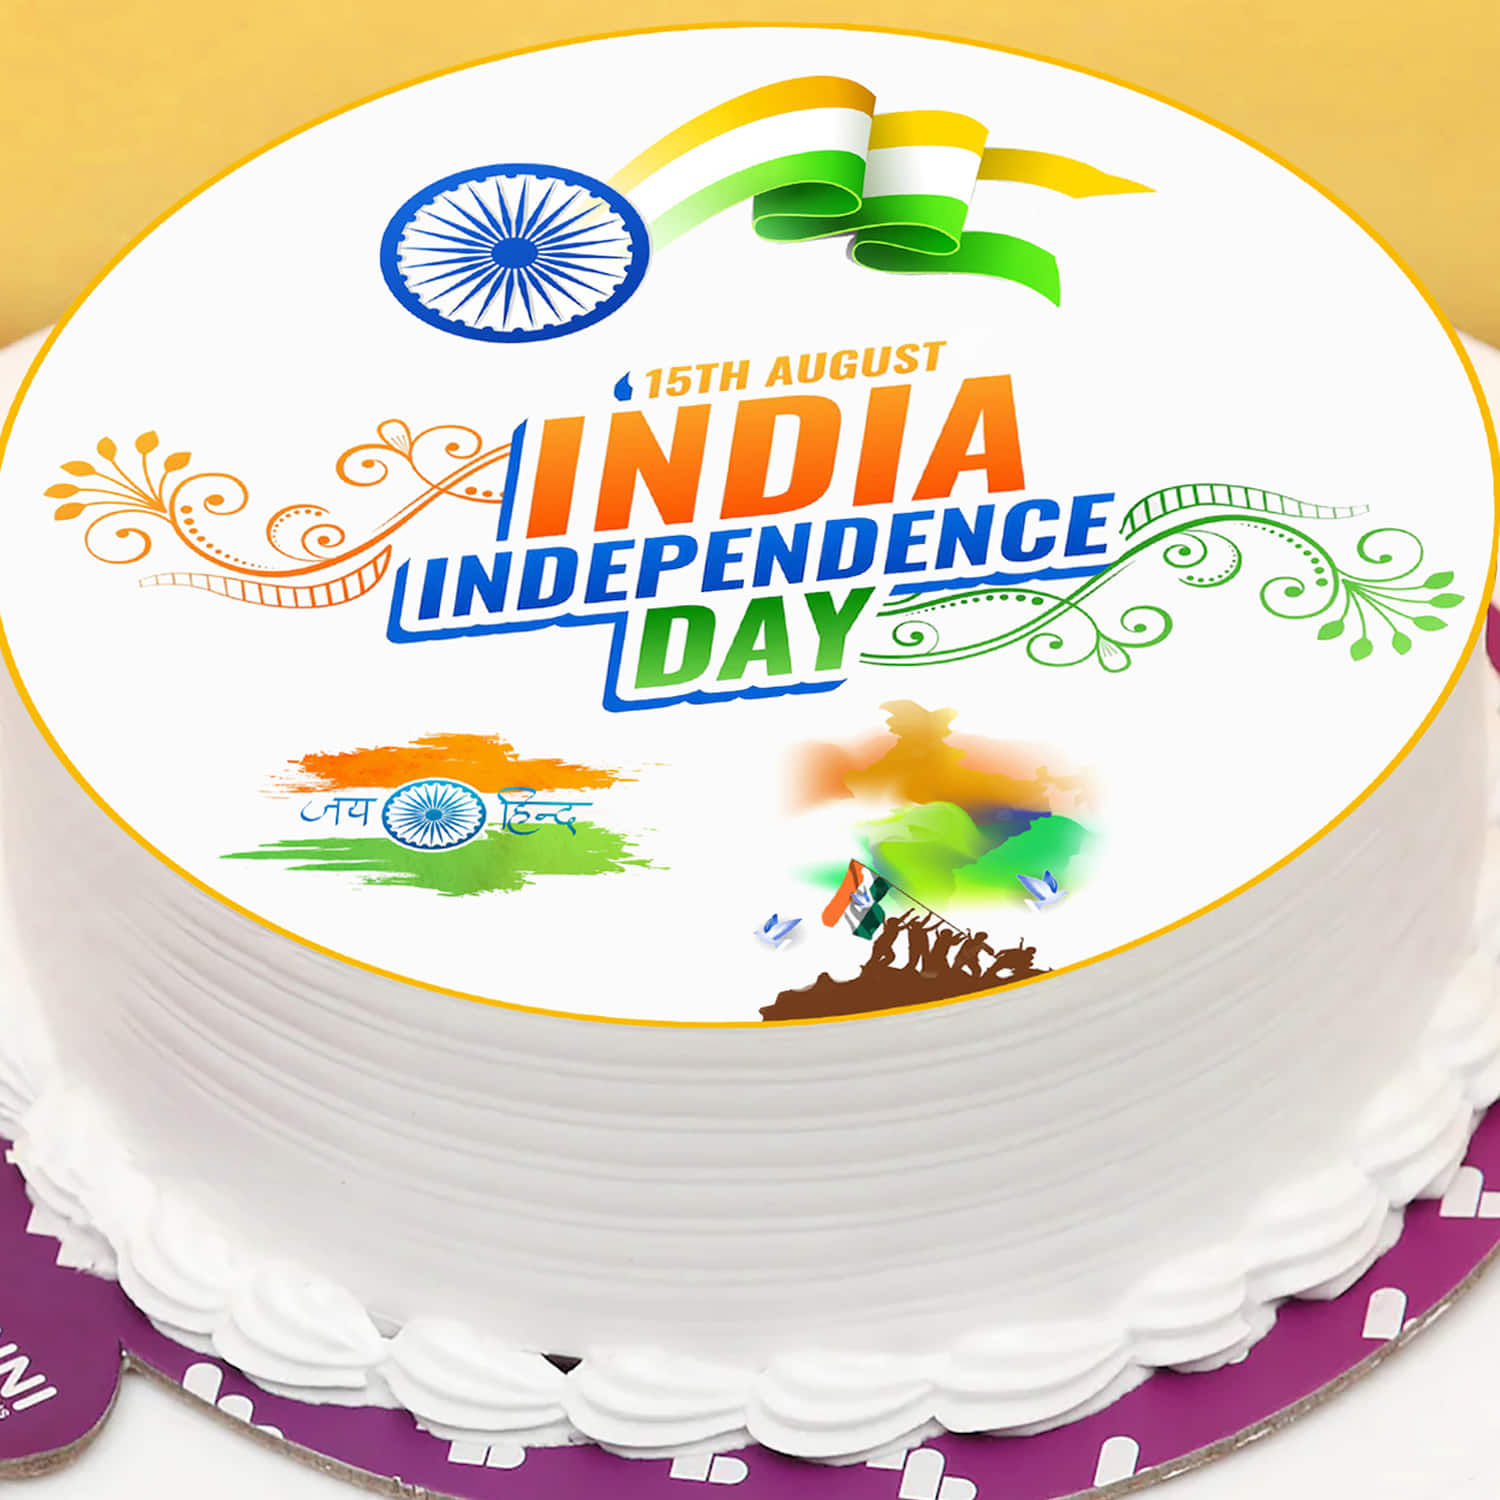 B' Bakers - HAPPY INDEPENDENCE DAY 🇮🇳🇮🇳🇮🇳 15th AUGUST... | Facebook